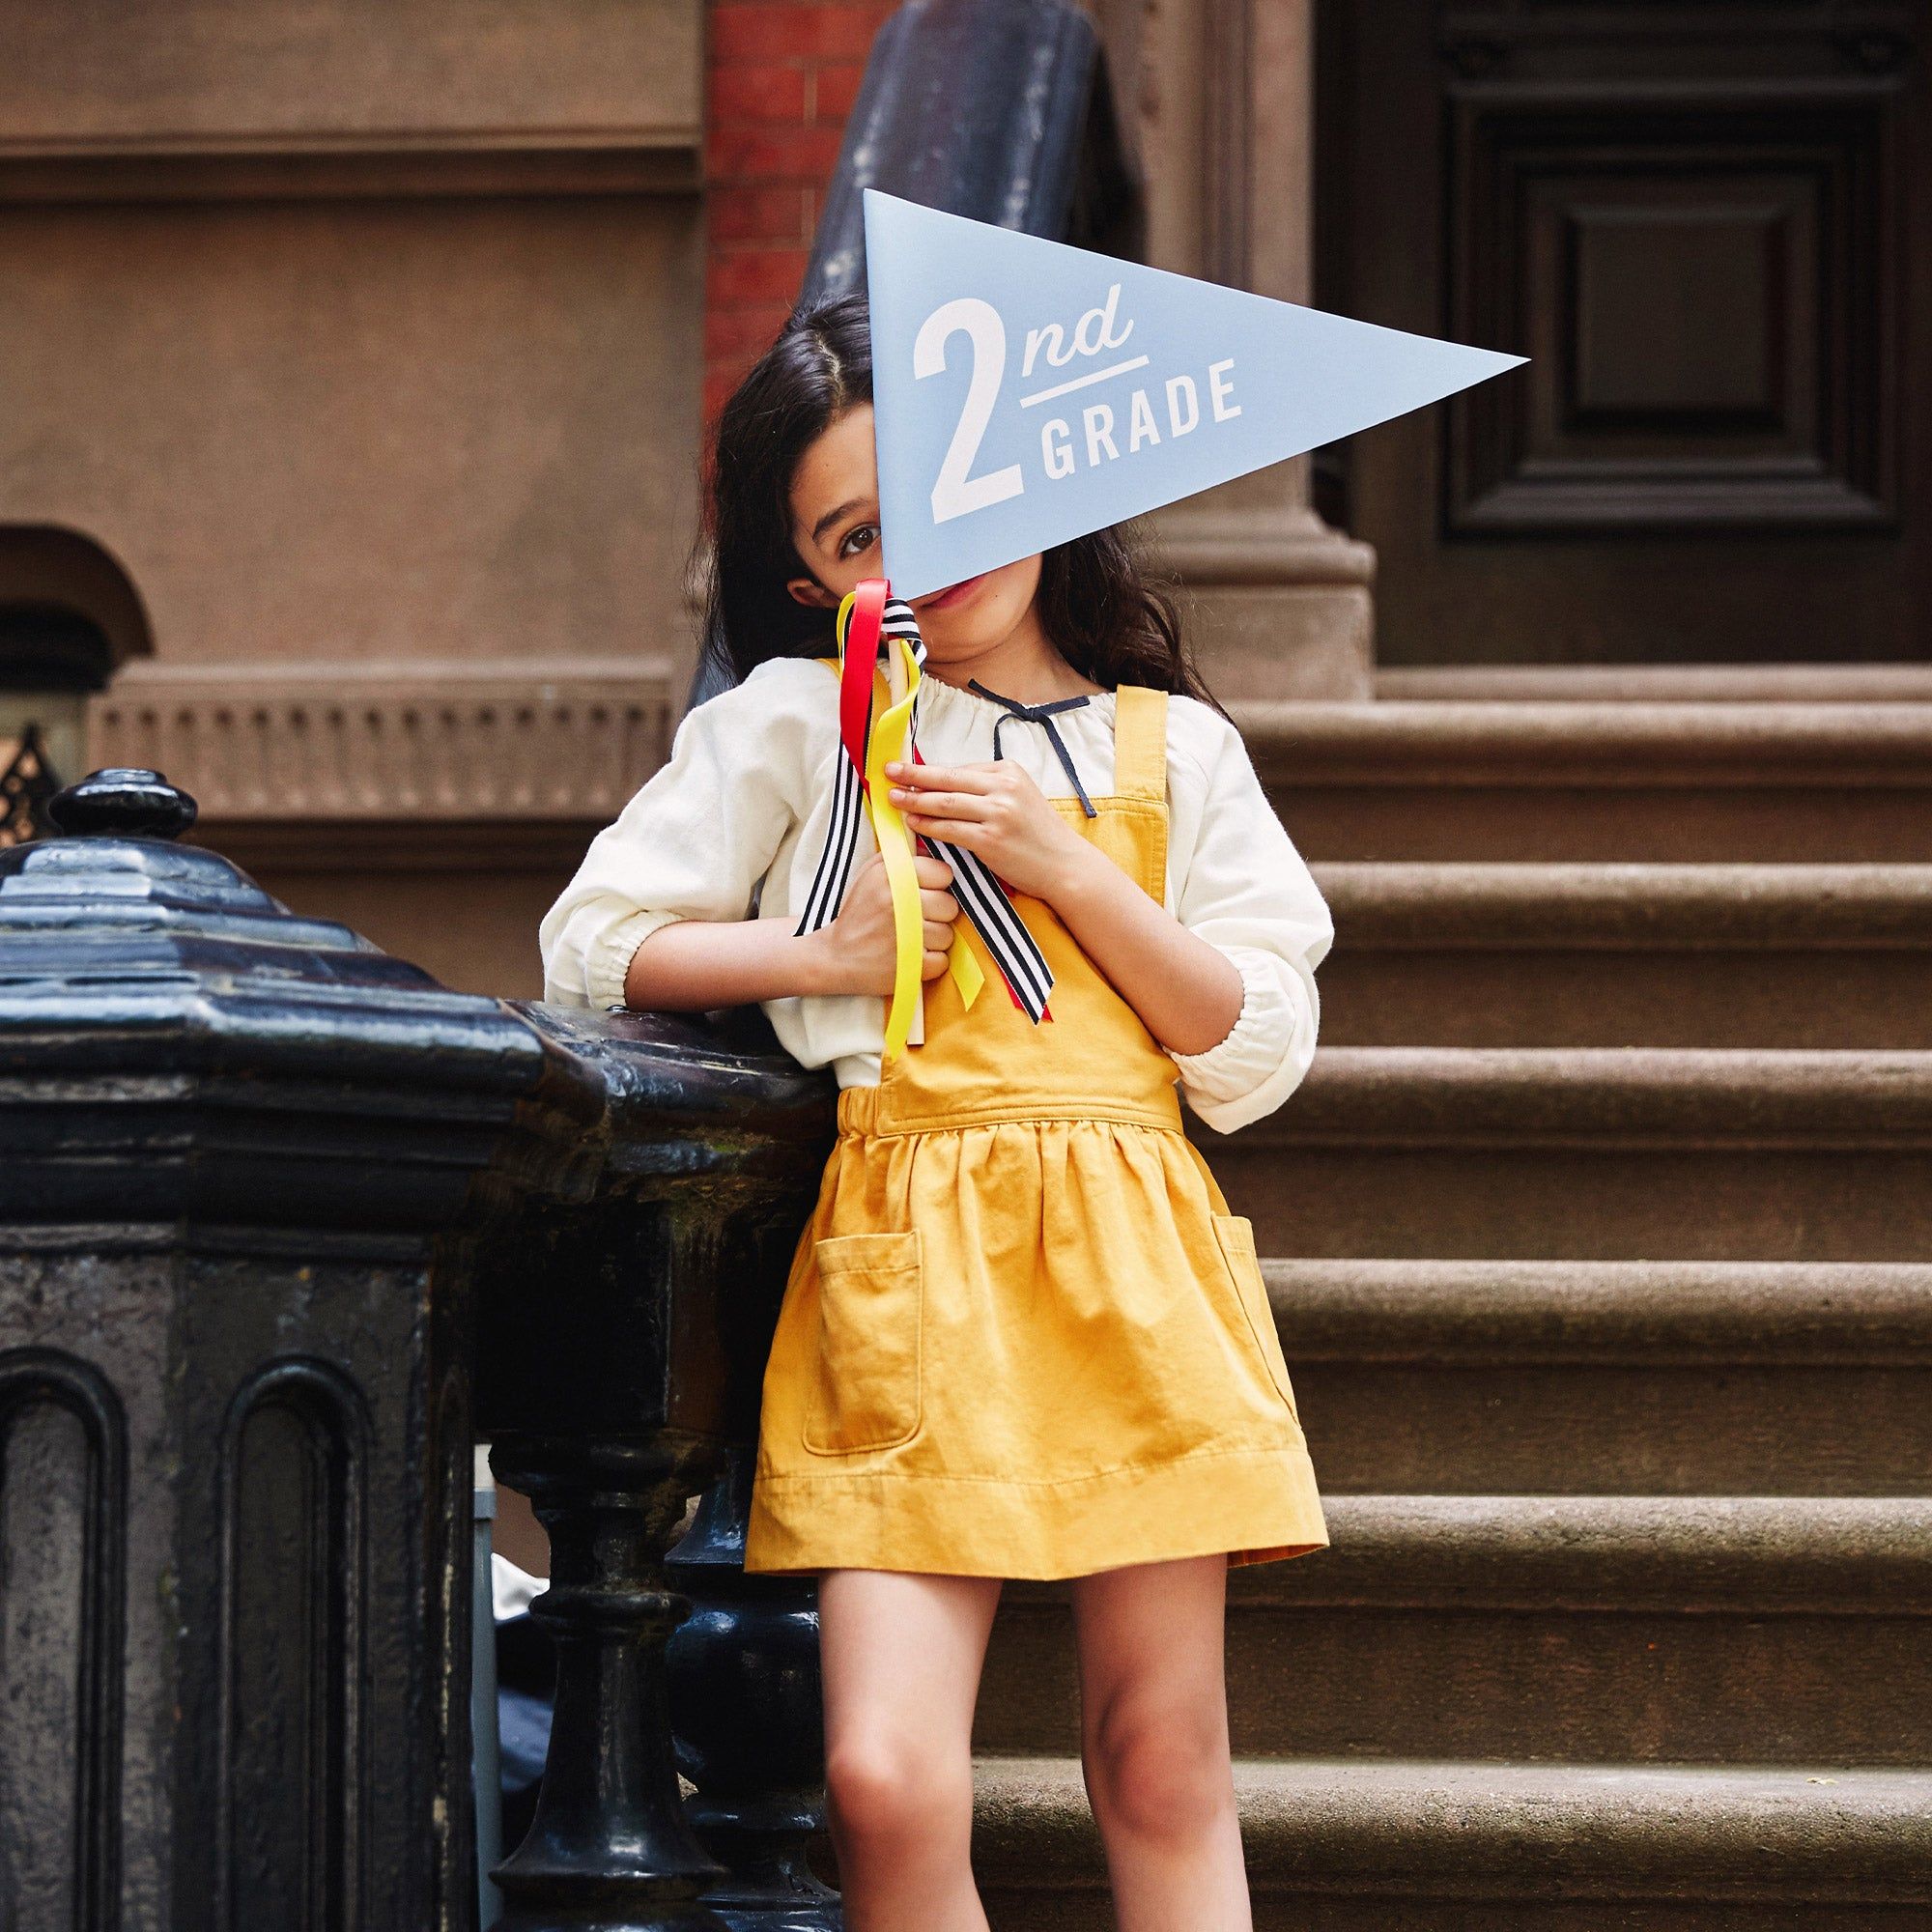 Little girl standing in front of her house, holding a flag that says "2nd Grade"